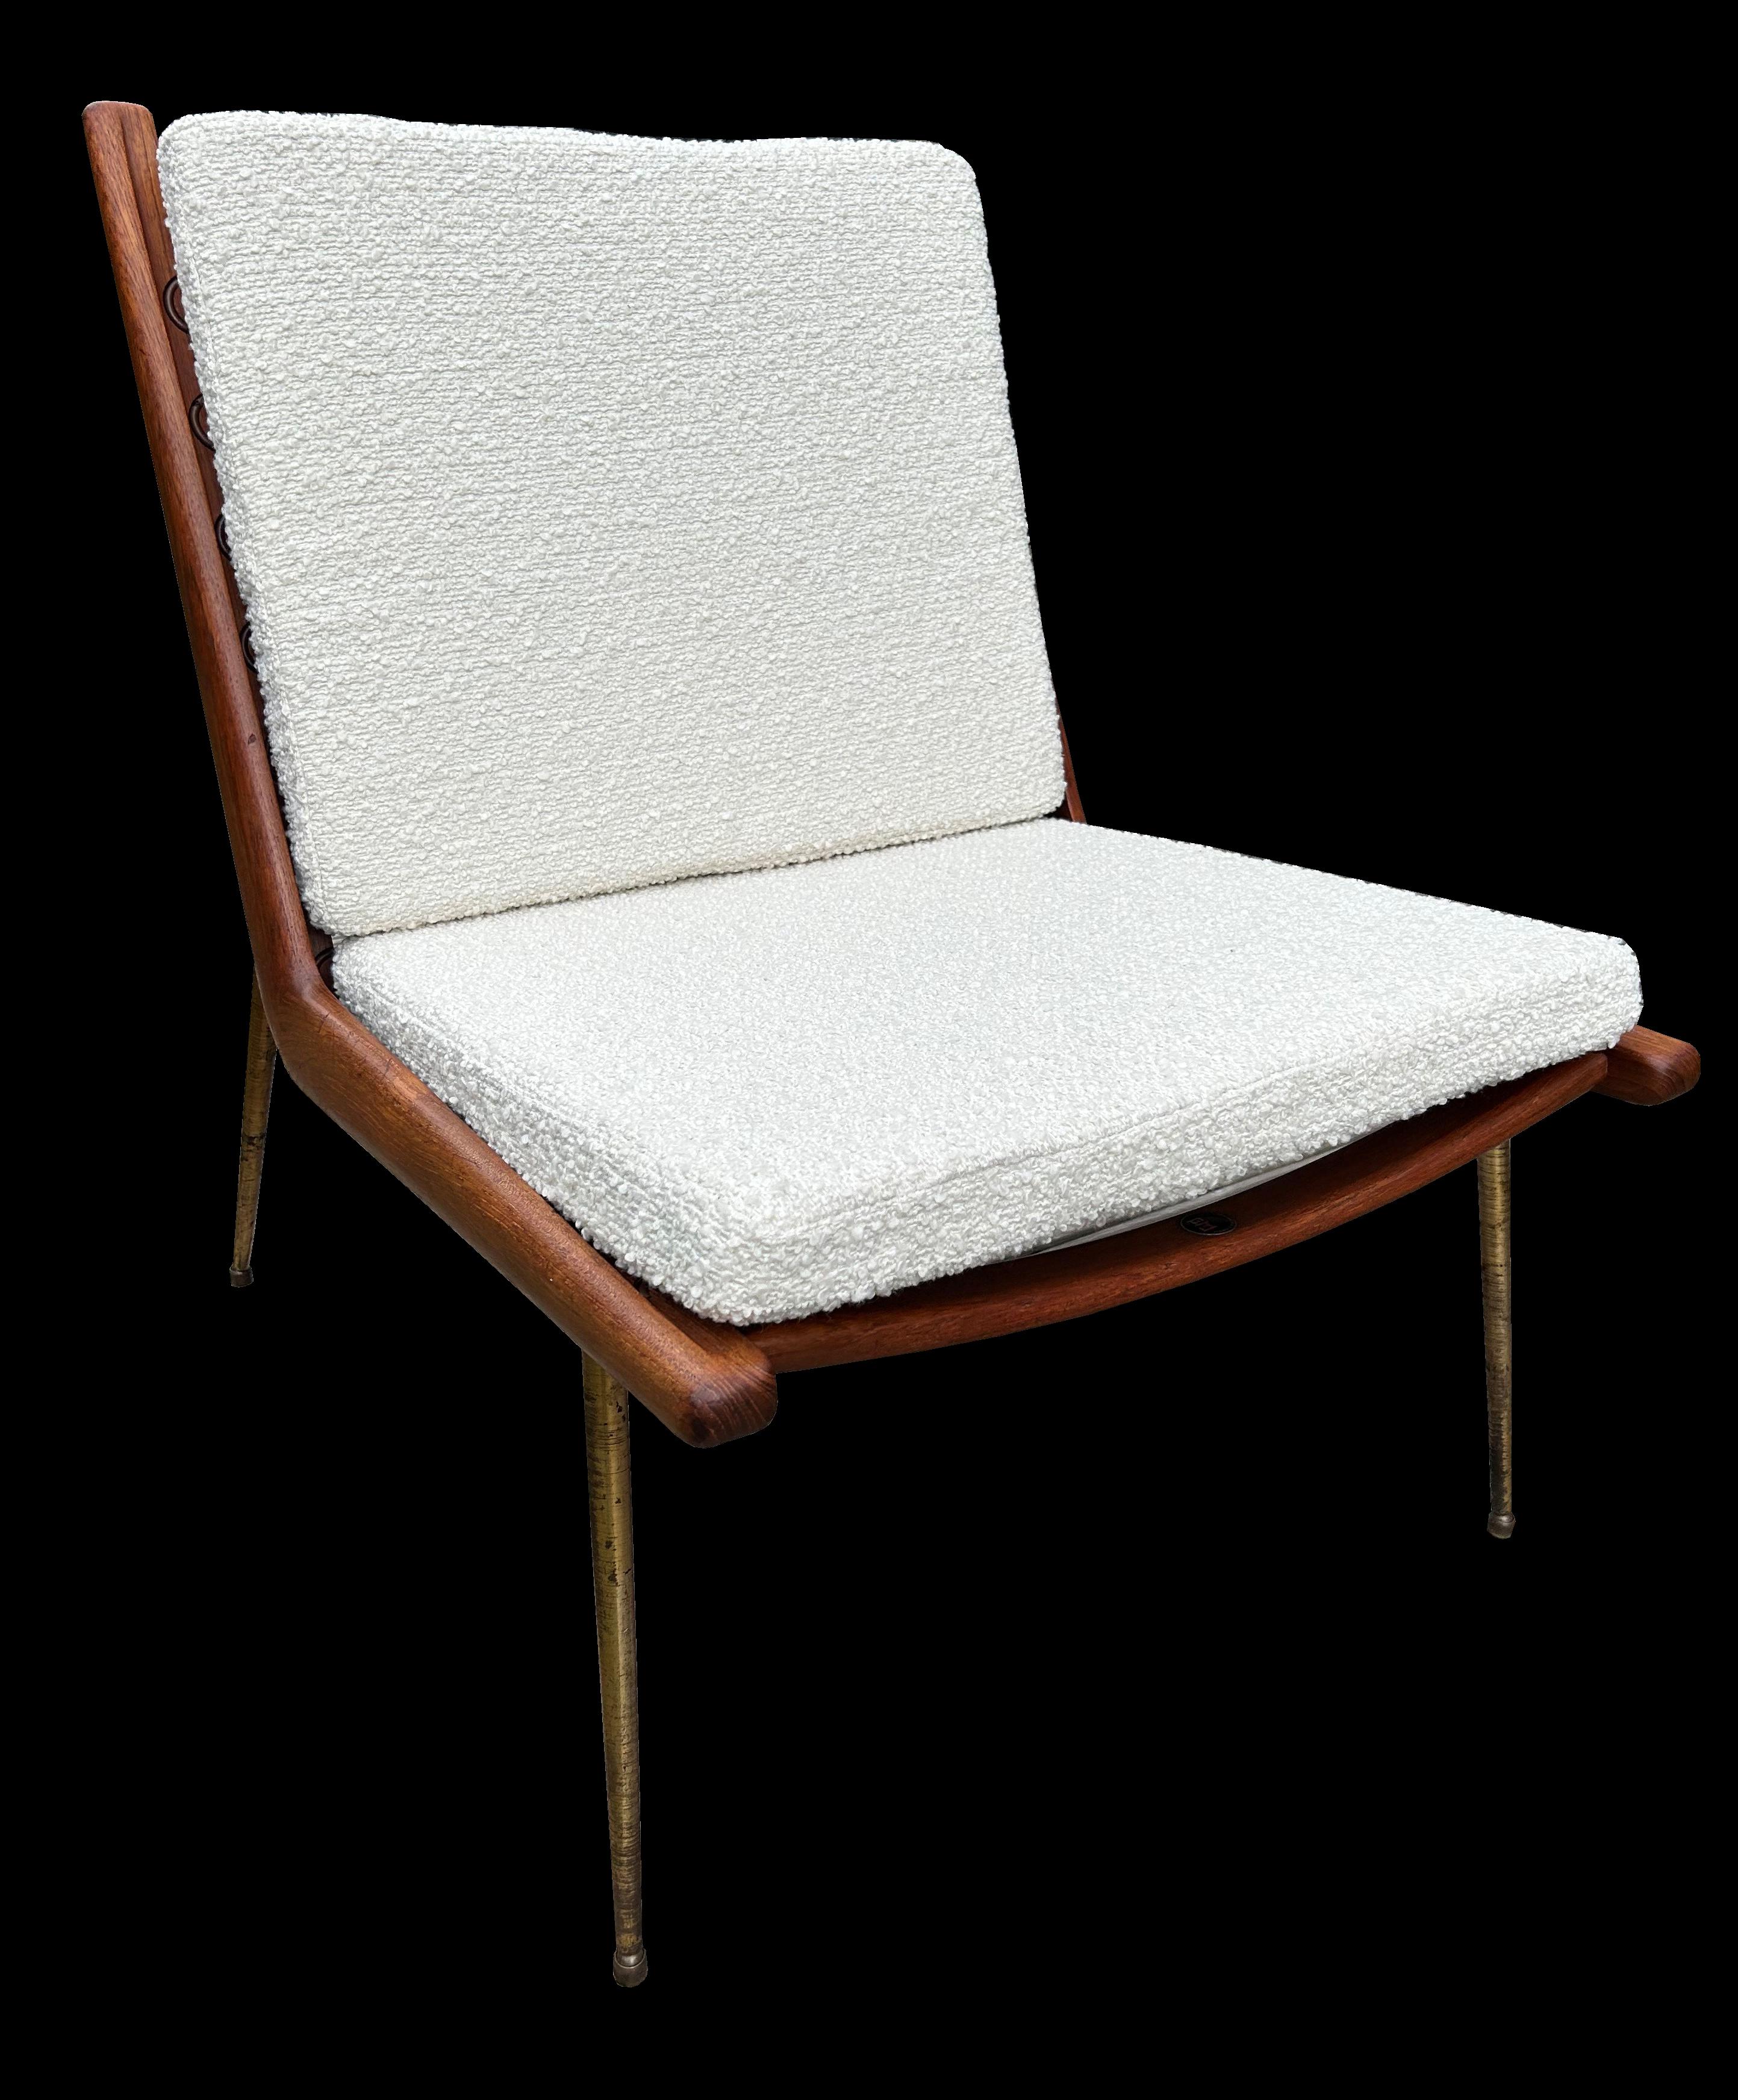 This is a very good original example of this classic chair, freshly upholstered in white boucle.